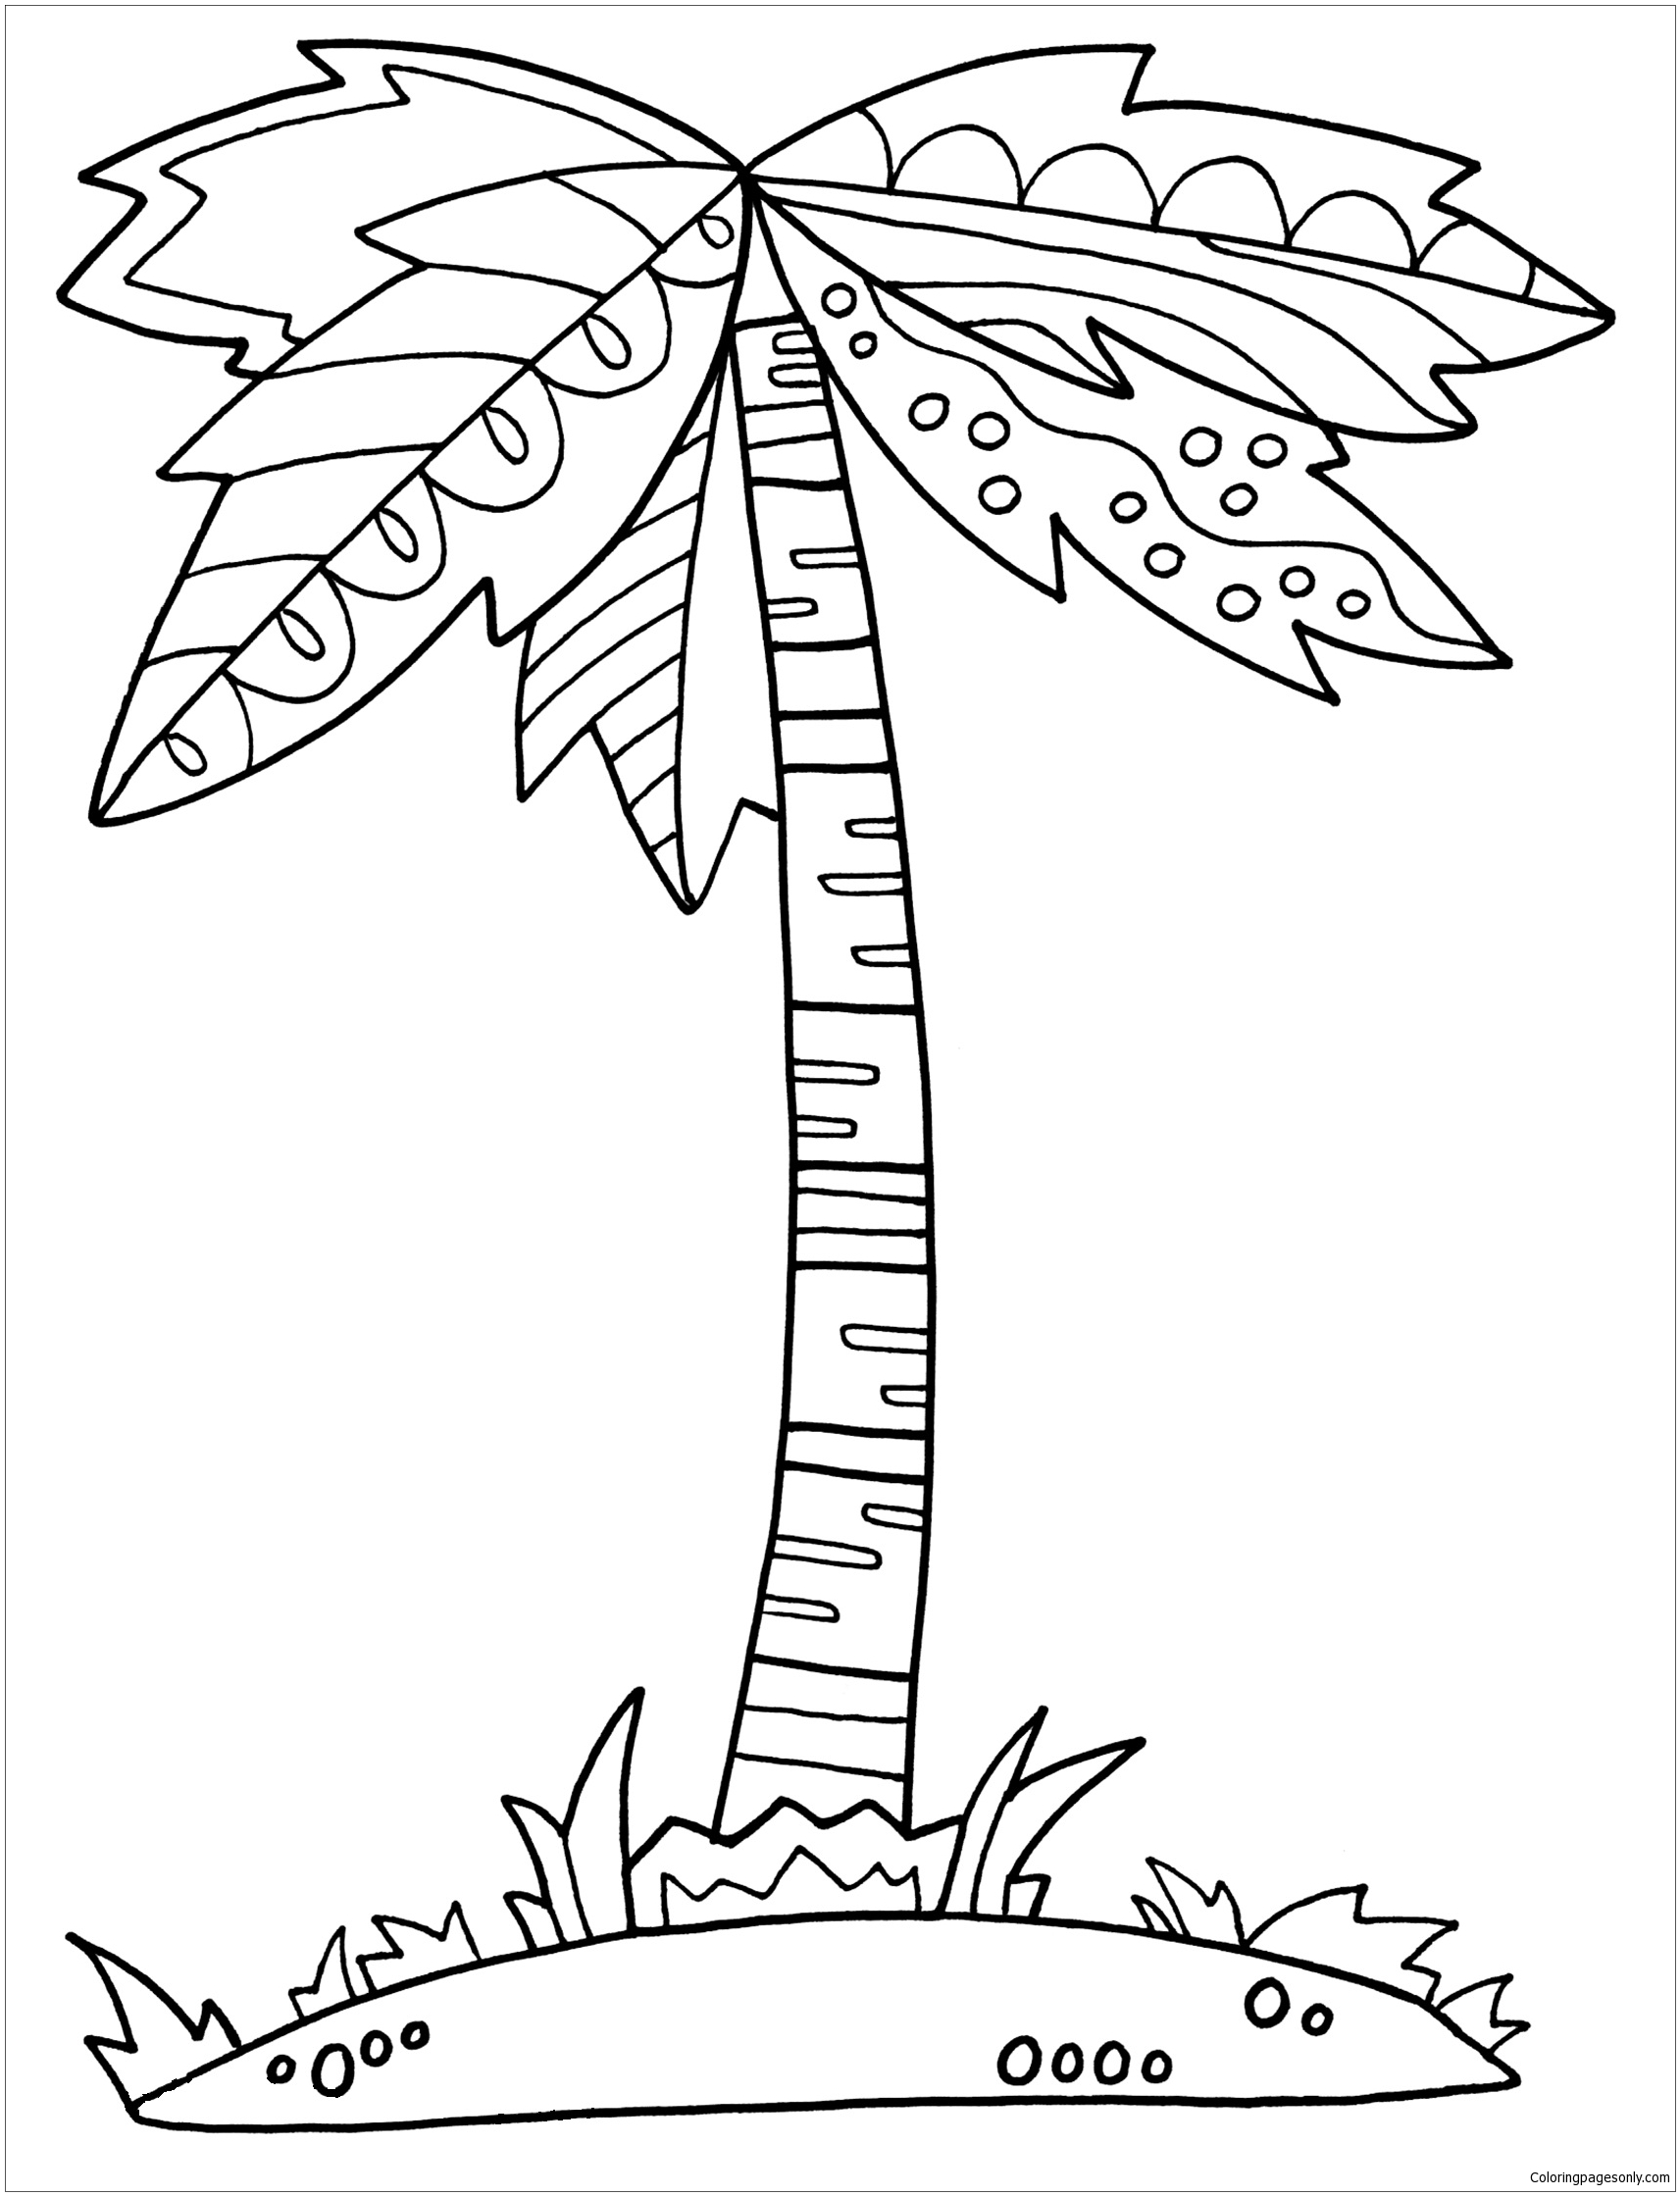 palm-tree-coloring-page-free-coloring-pages-online